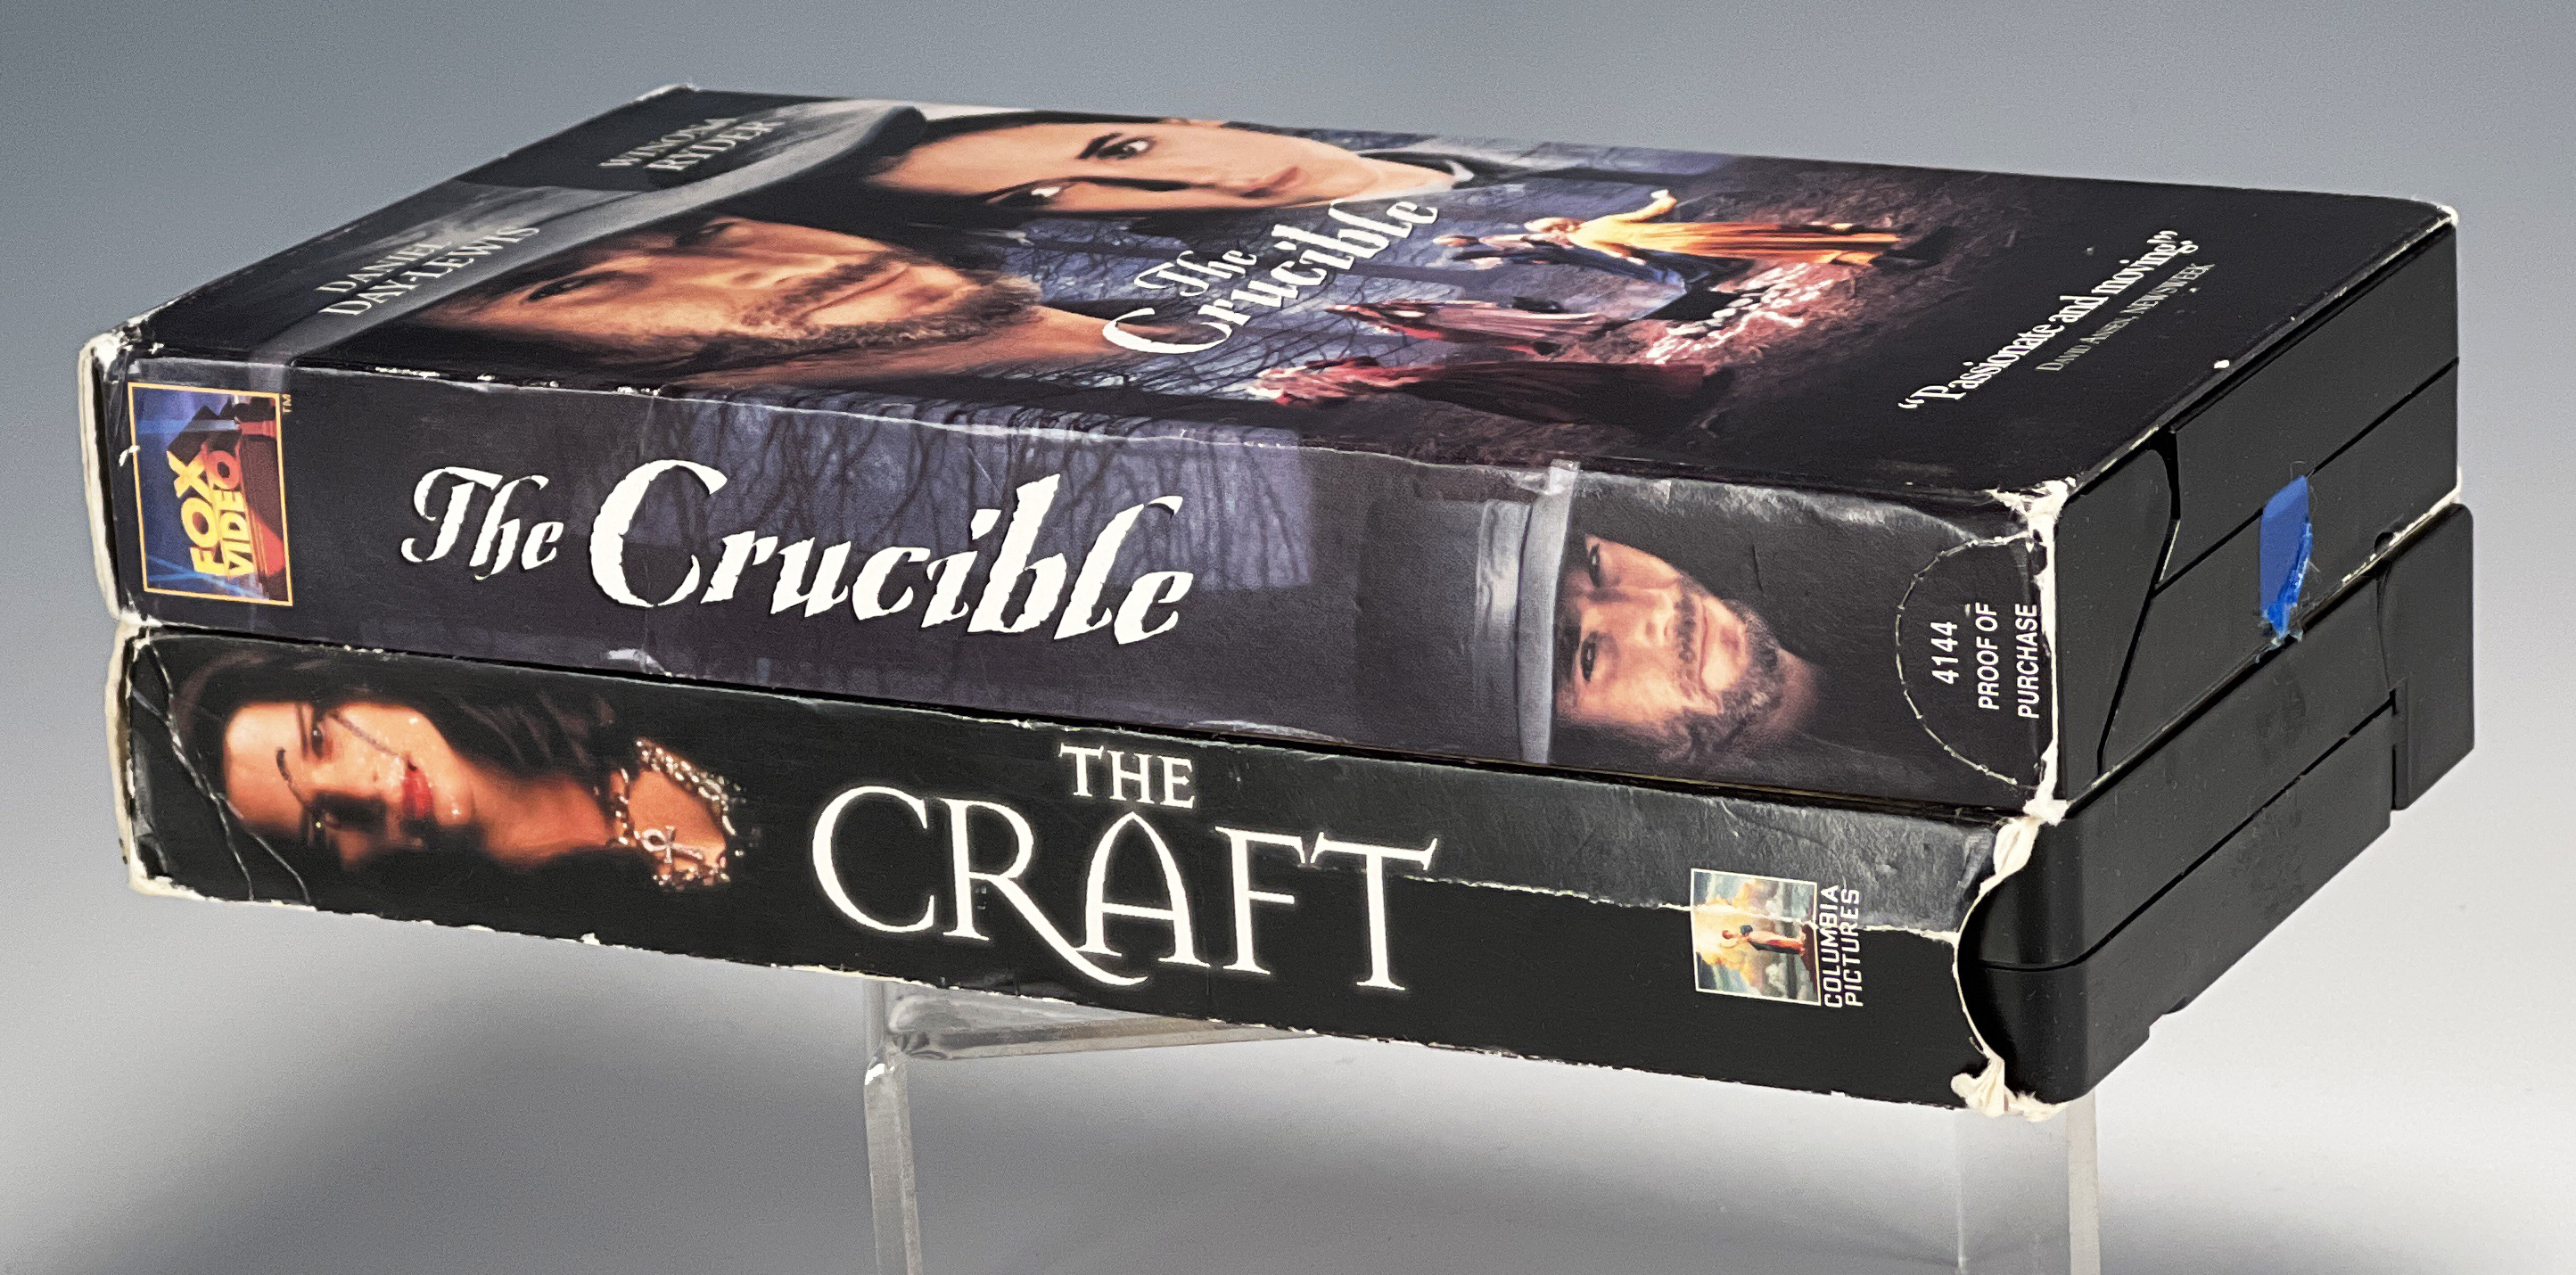 The Craft & The Crucible Vhs Daniel Day-Lewis image 10